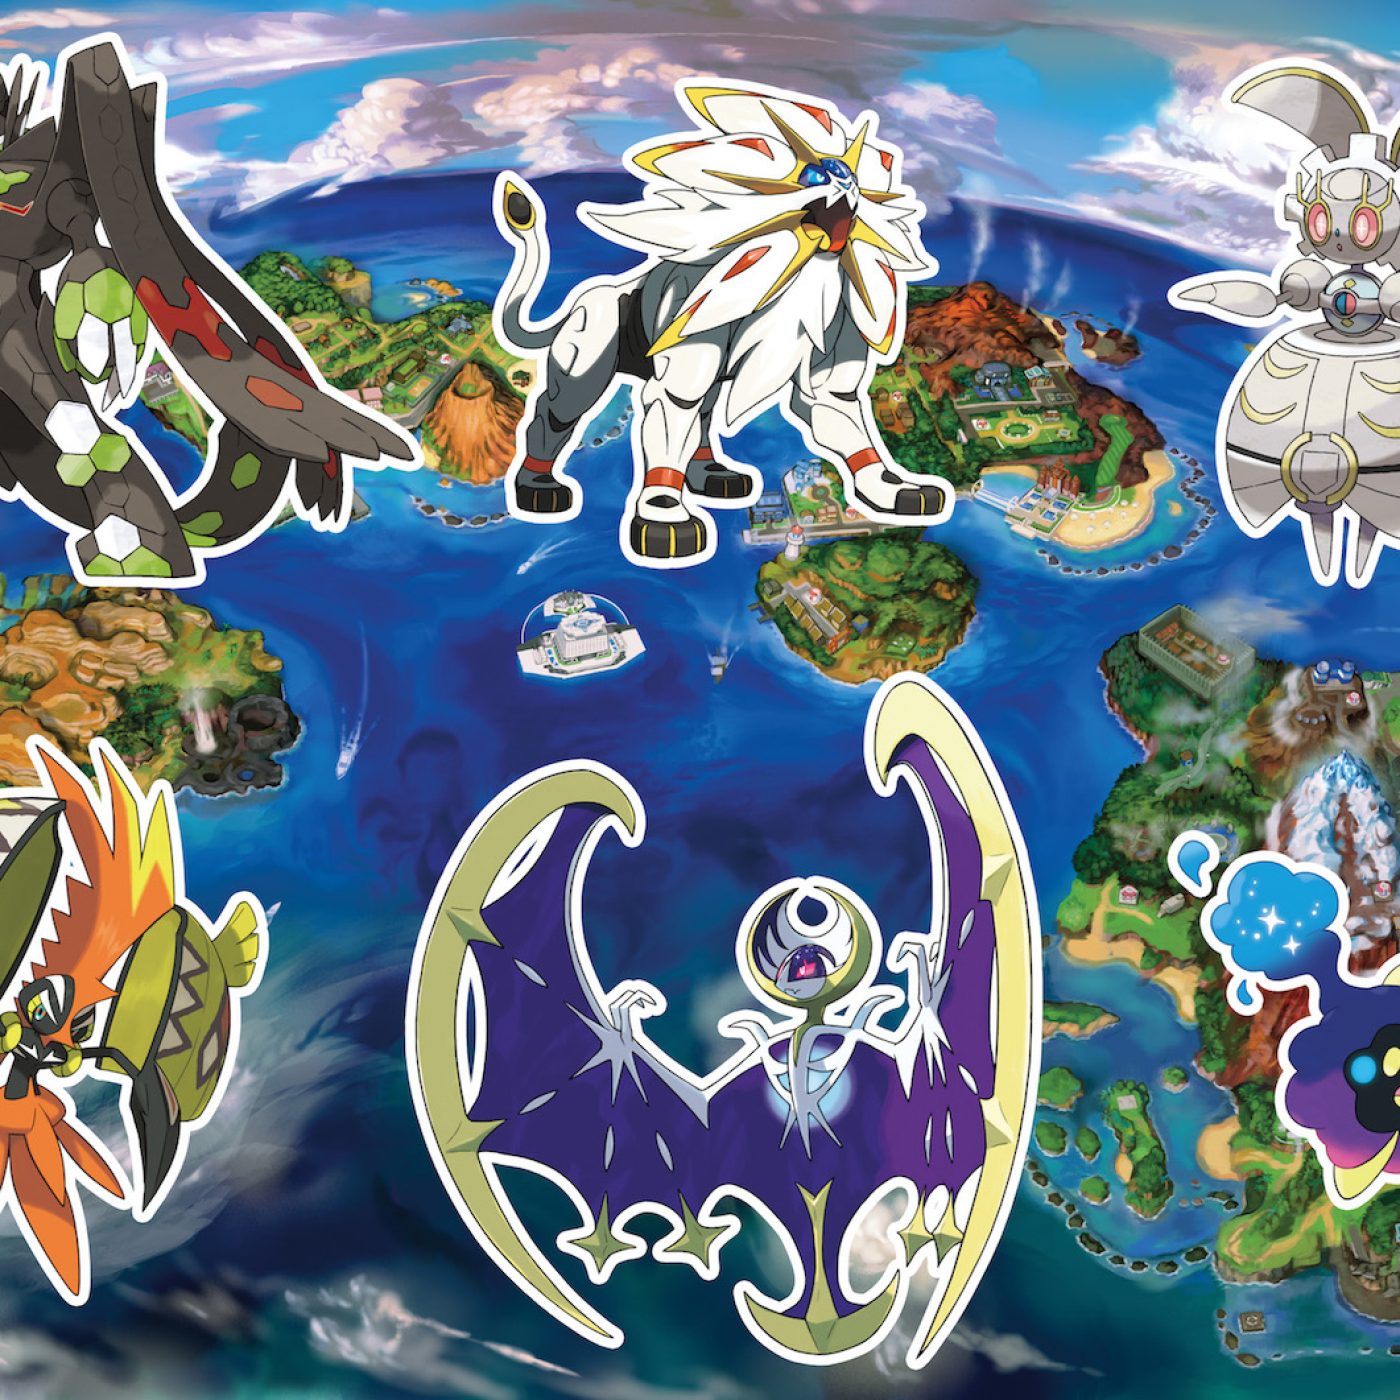 Who Do You Think The Missing Legendaries, Mythicals, Ultra Beasts